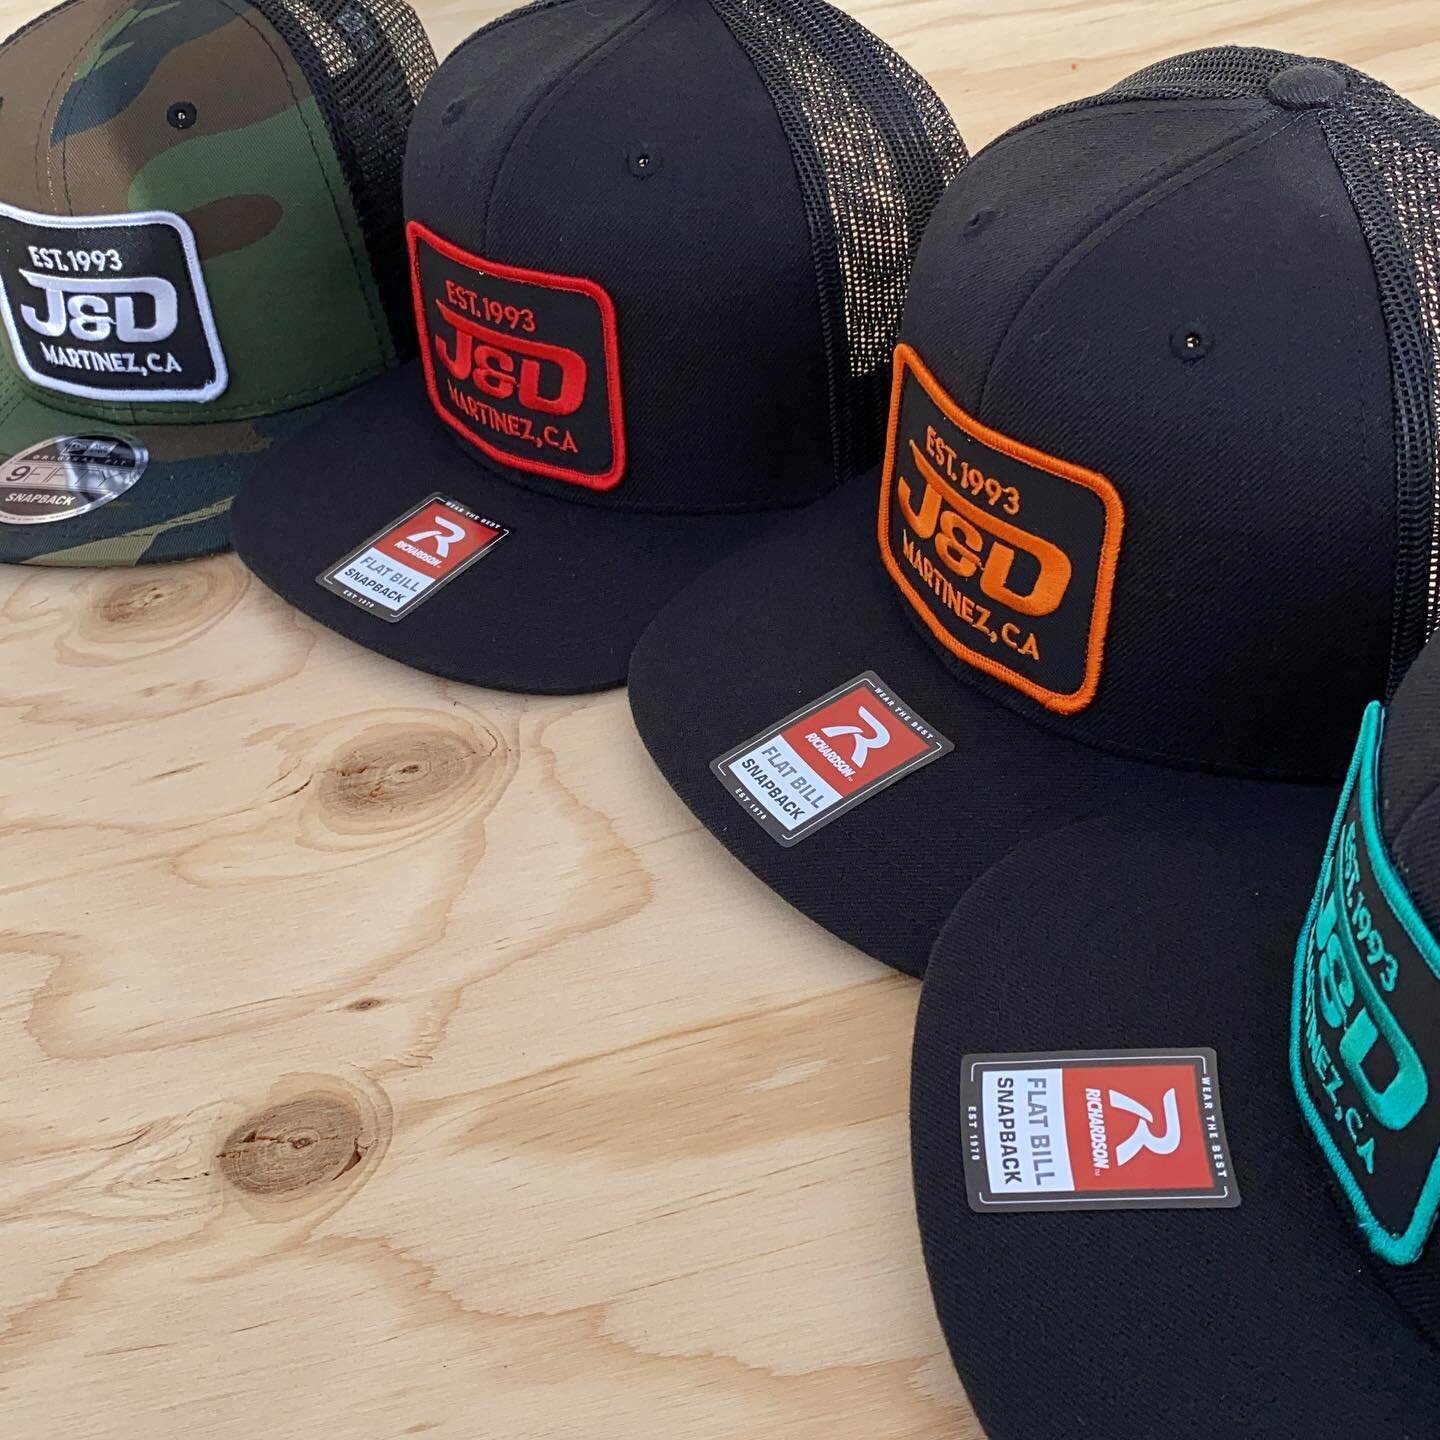 New hats available now.